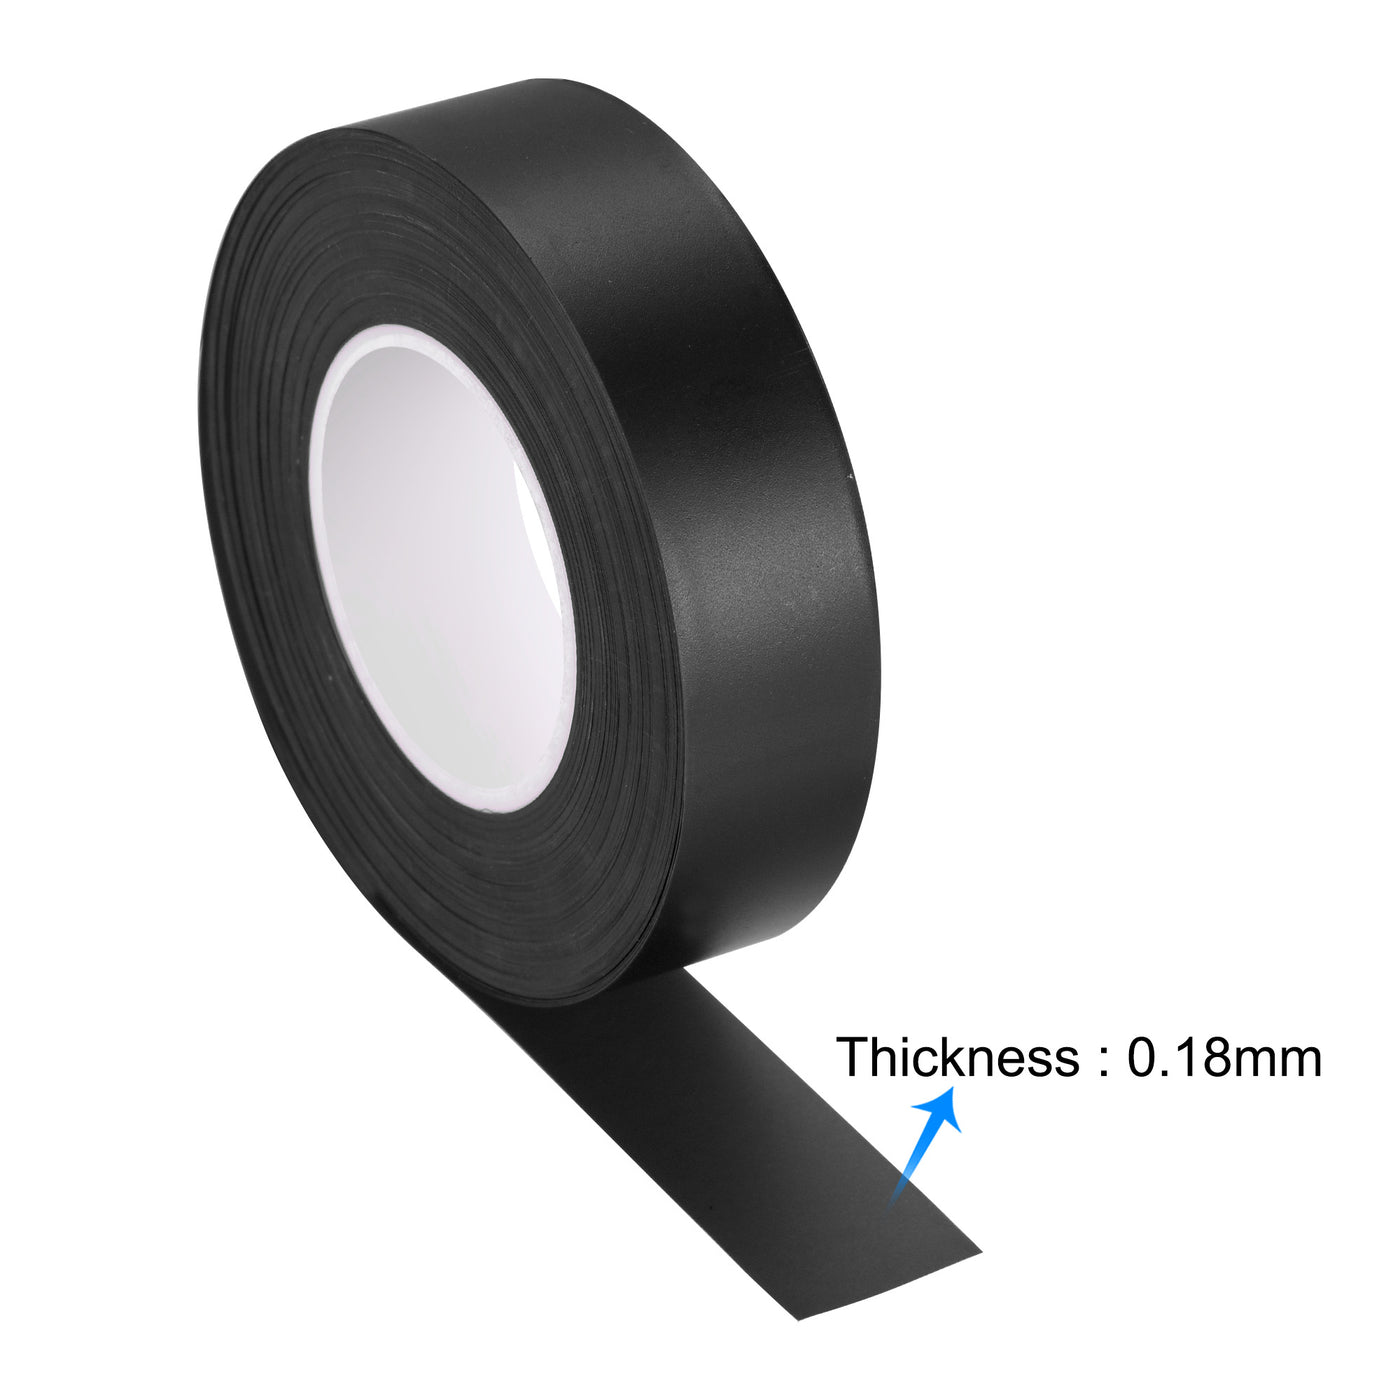 uxcell Uxcell PVC Flagging Tape 20mm x 20m/65.6ft Marking Tape Non-Adhesive Black